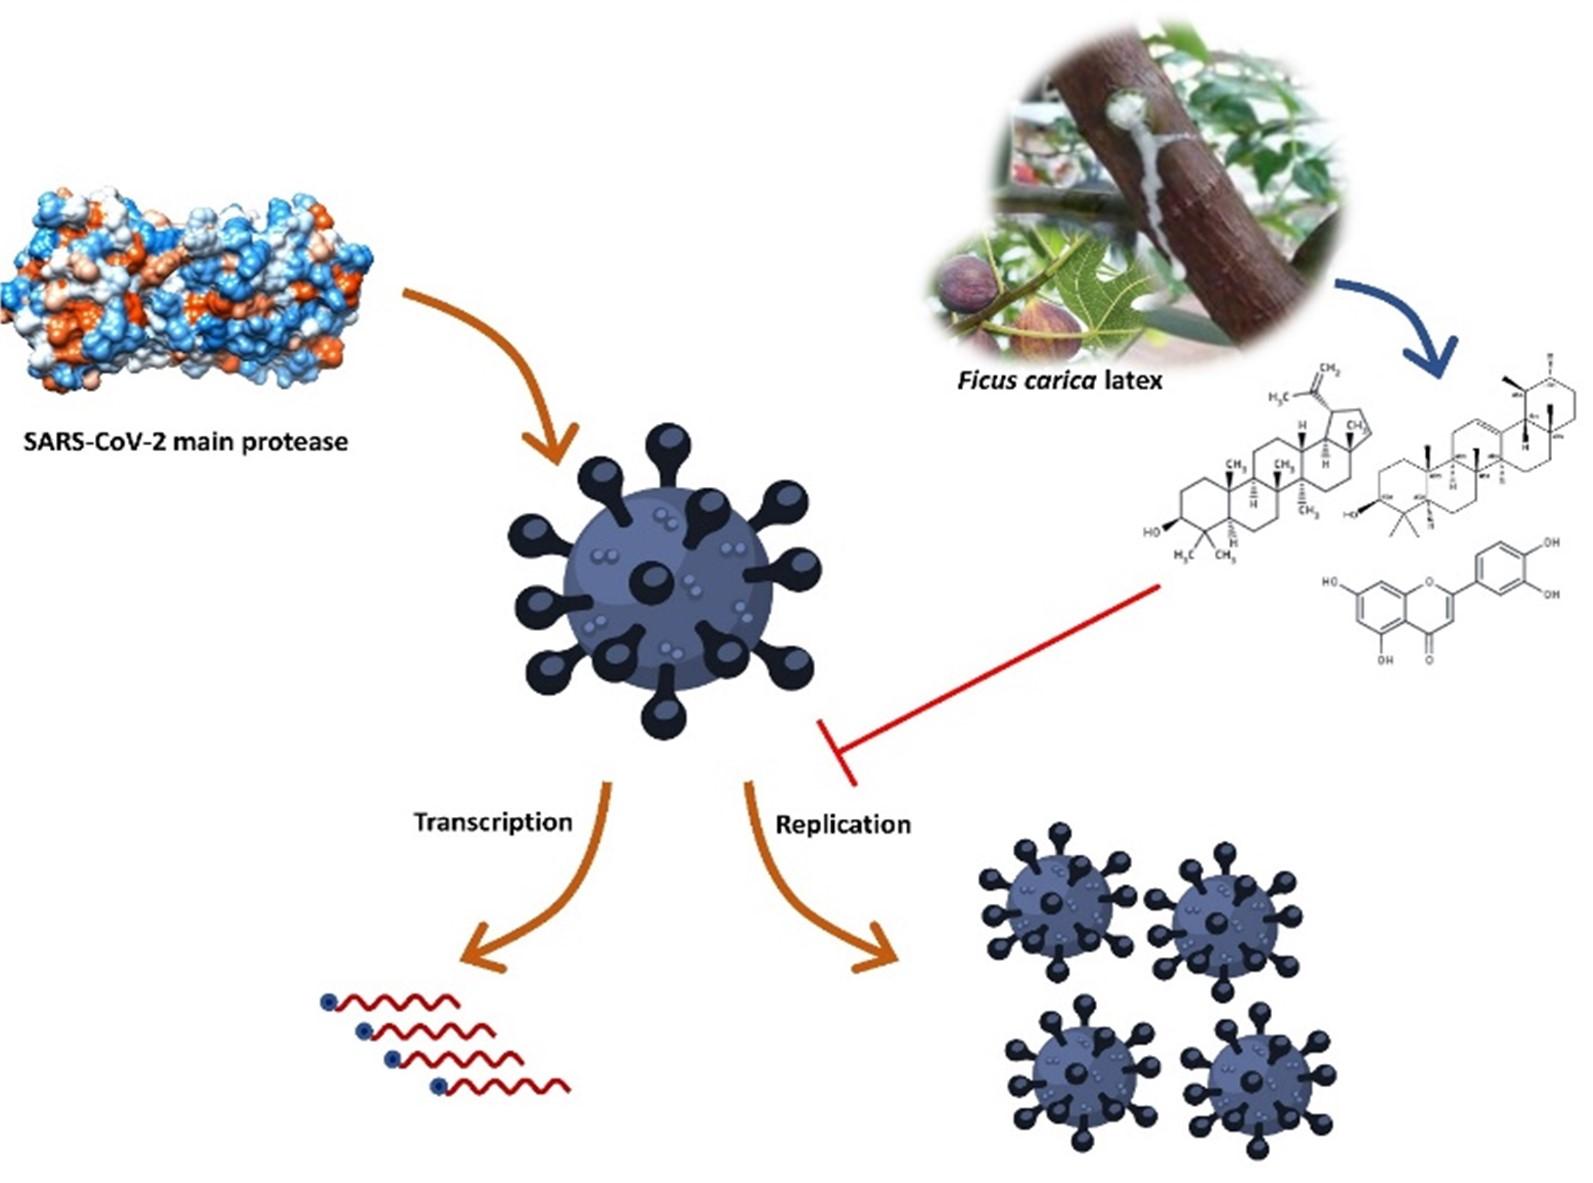 Identification of potential SARS-CoV-2 main protease inhibitors from Ficus Carica Latex: An in-silico approach